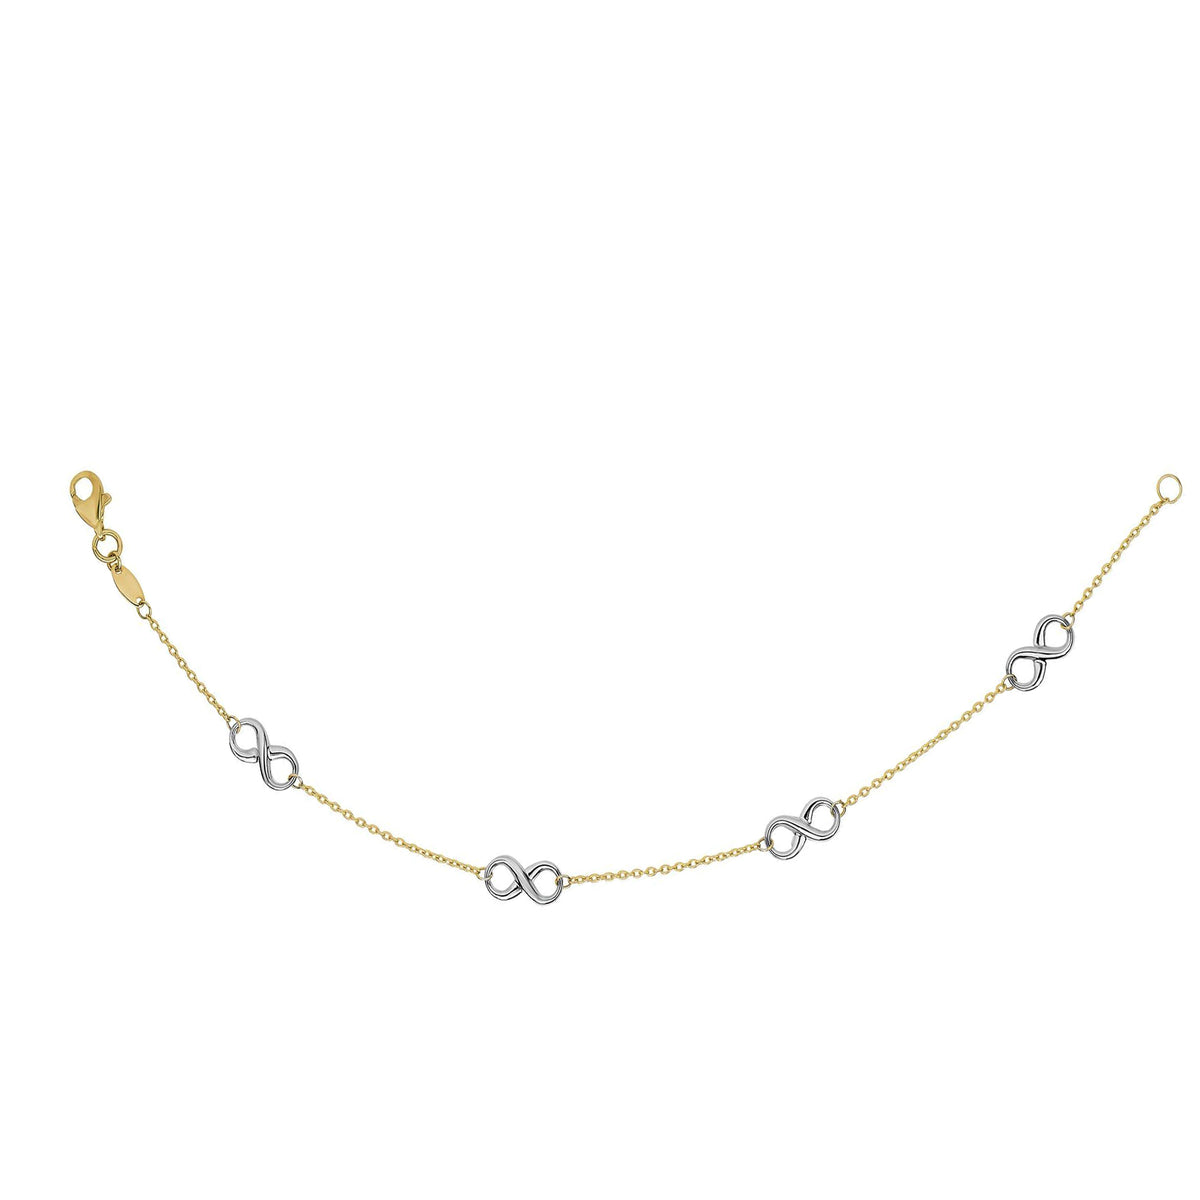 14k Yellow And White Gold Infinity Charms Bracelet, 7.5"